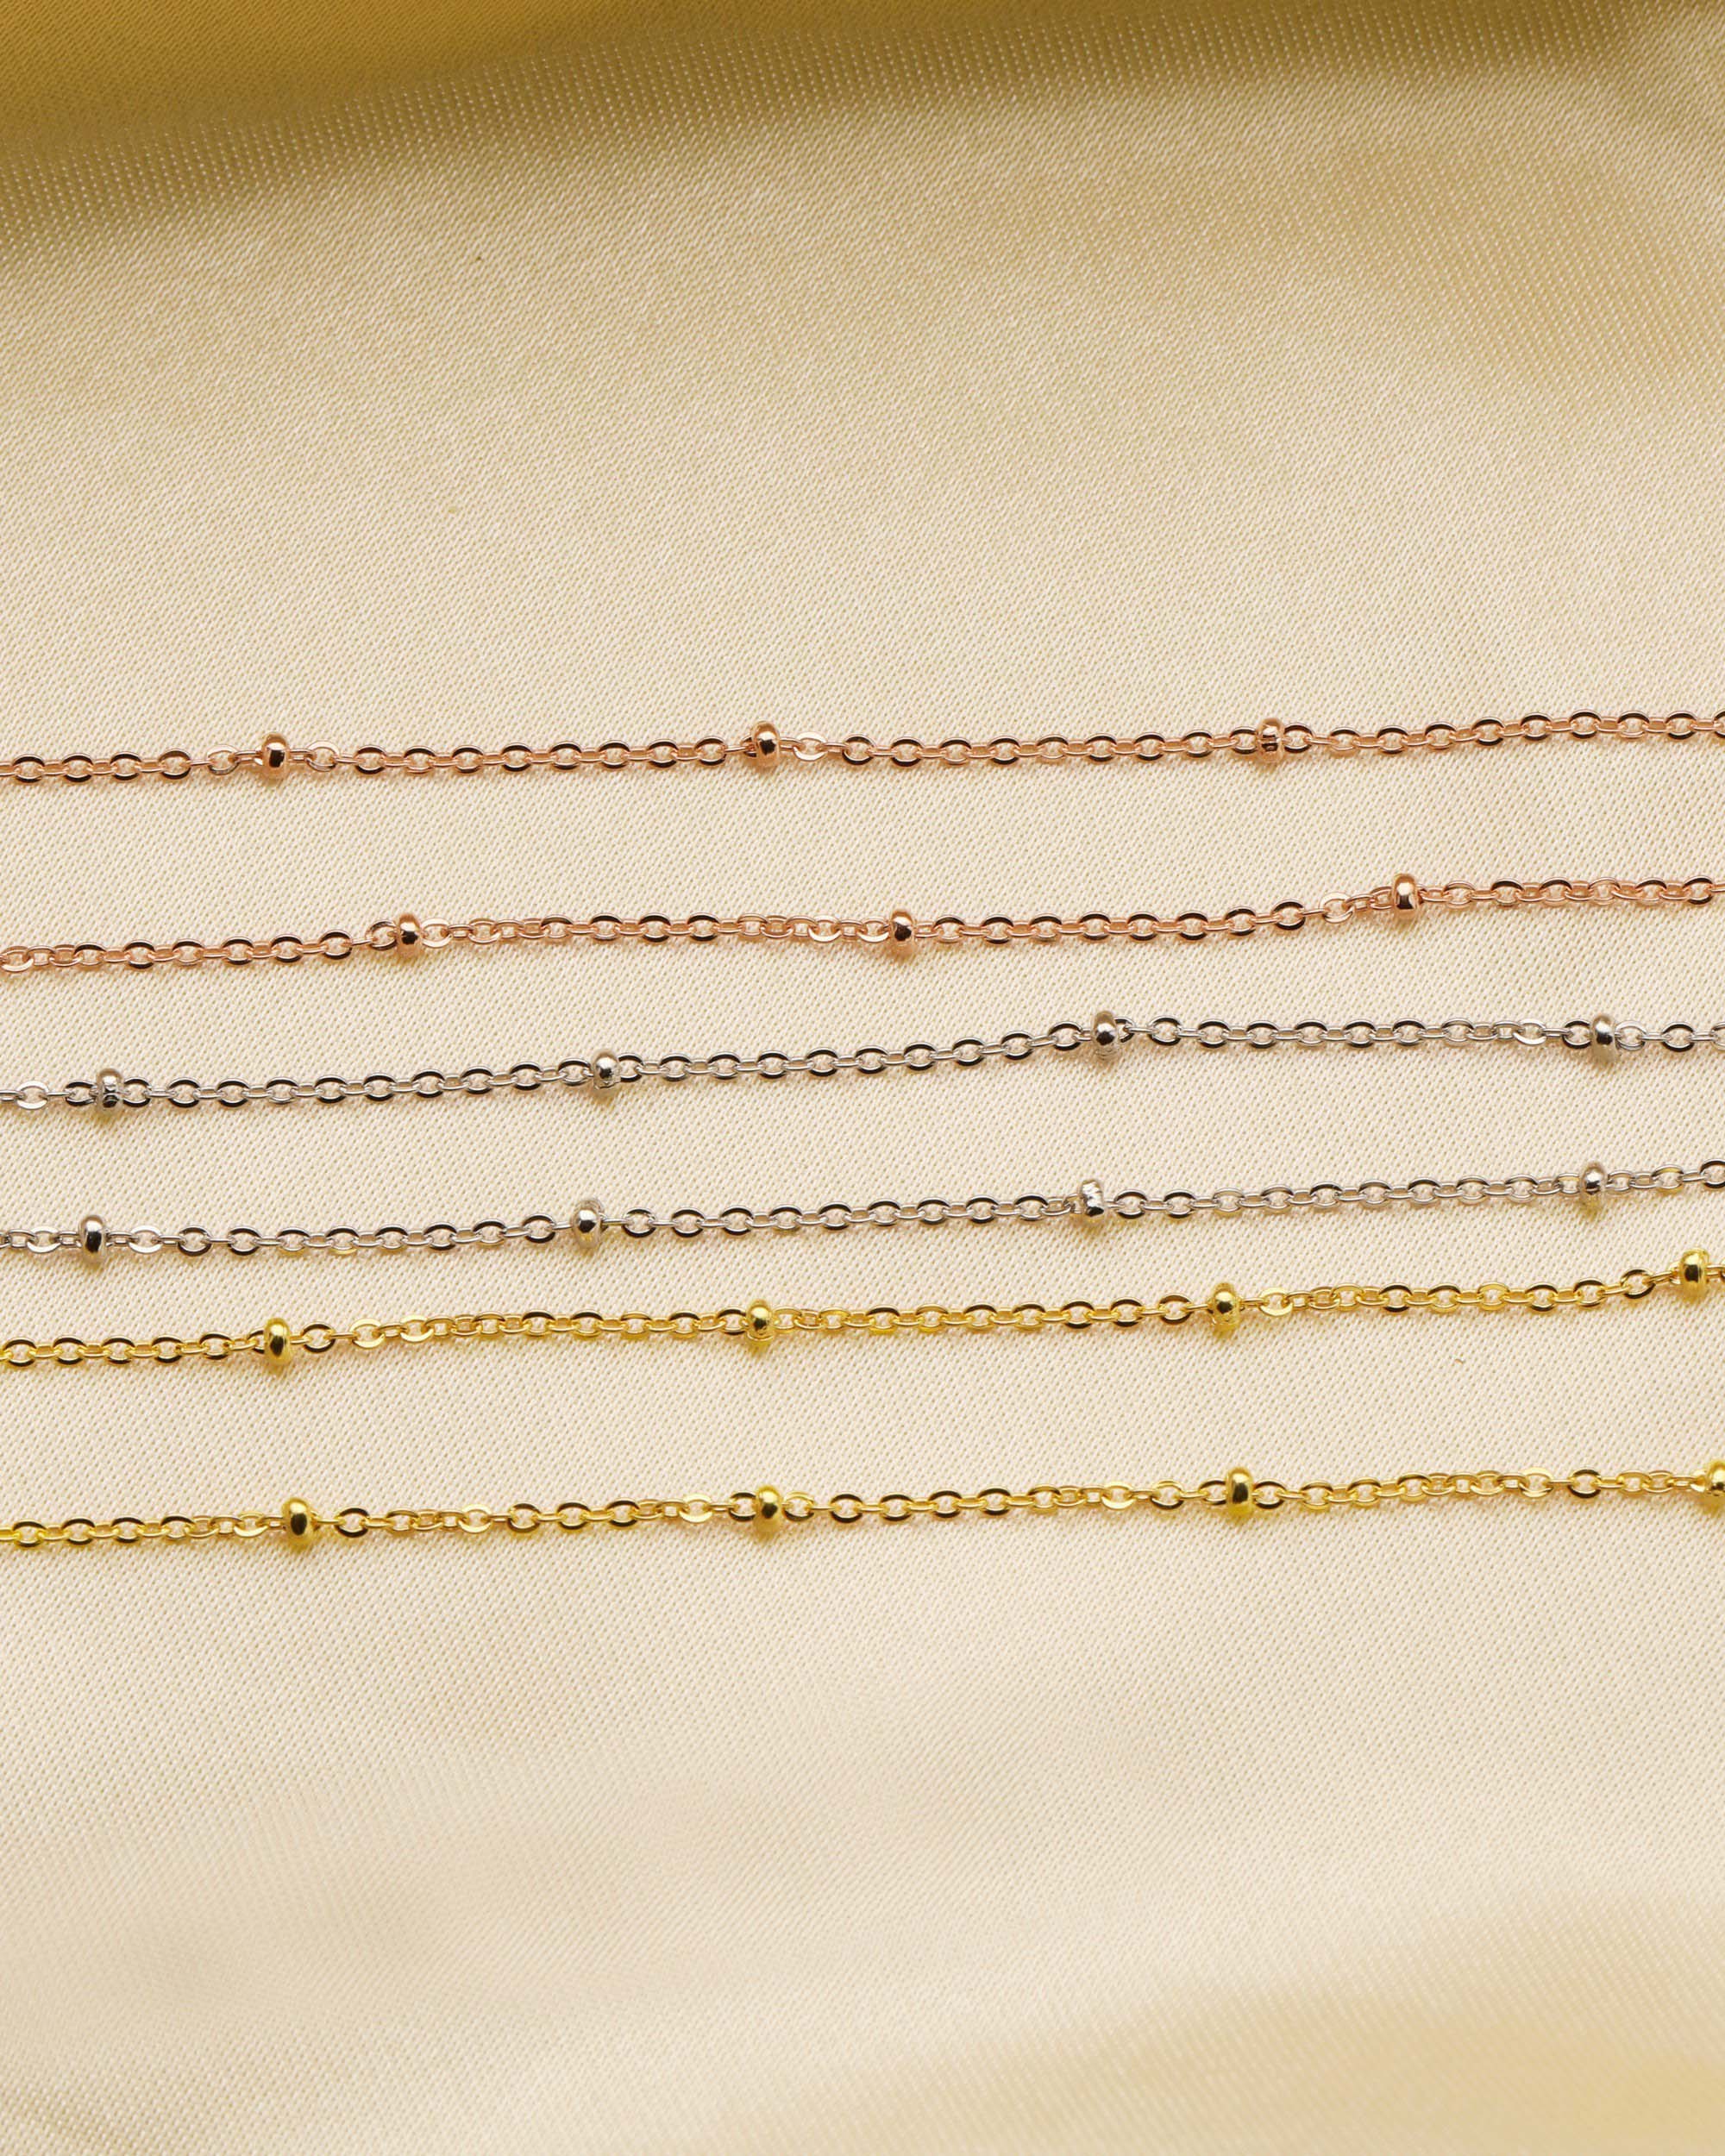 Cable 2MM Beads Chain Necklace,Solid 925 Solid Sterling Silver Rose Gold Plated Necklace Chain,Simple O Chain 16Inches with 2 Inch Extension Chain 1320029 - Click Image to Close